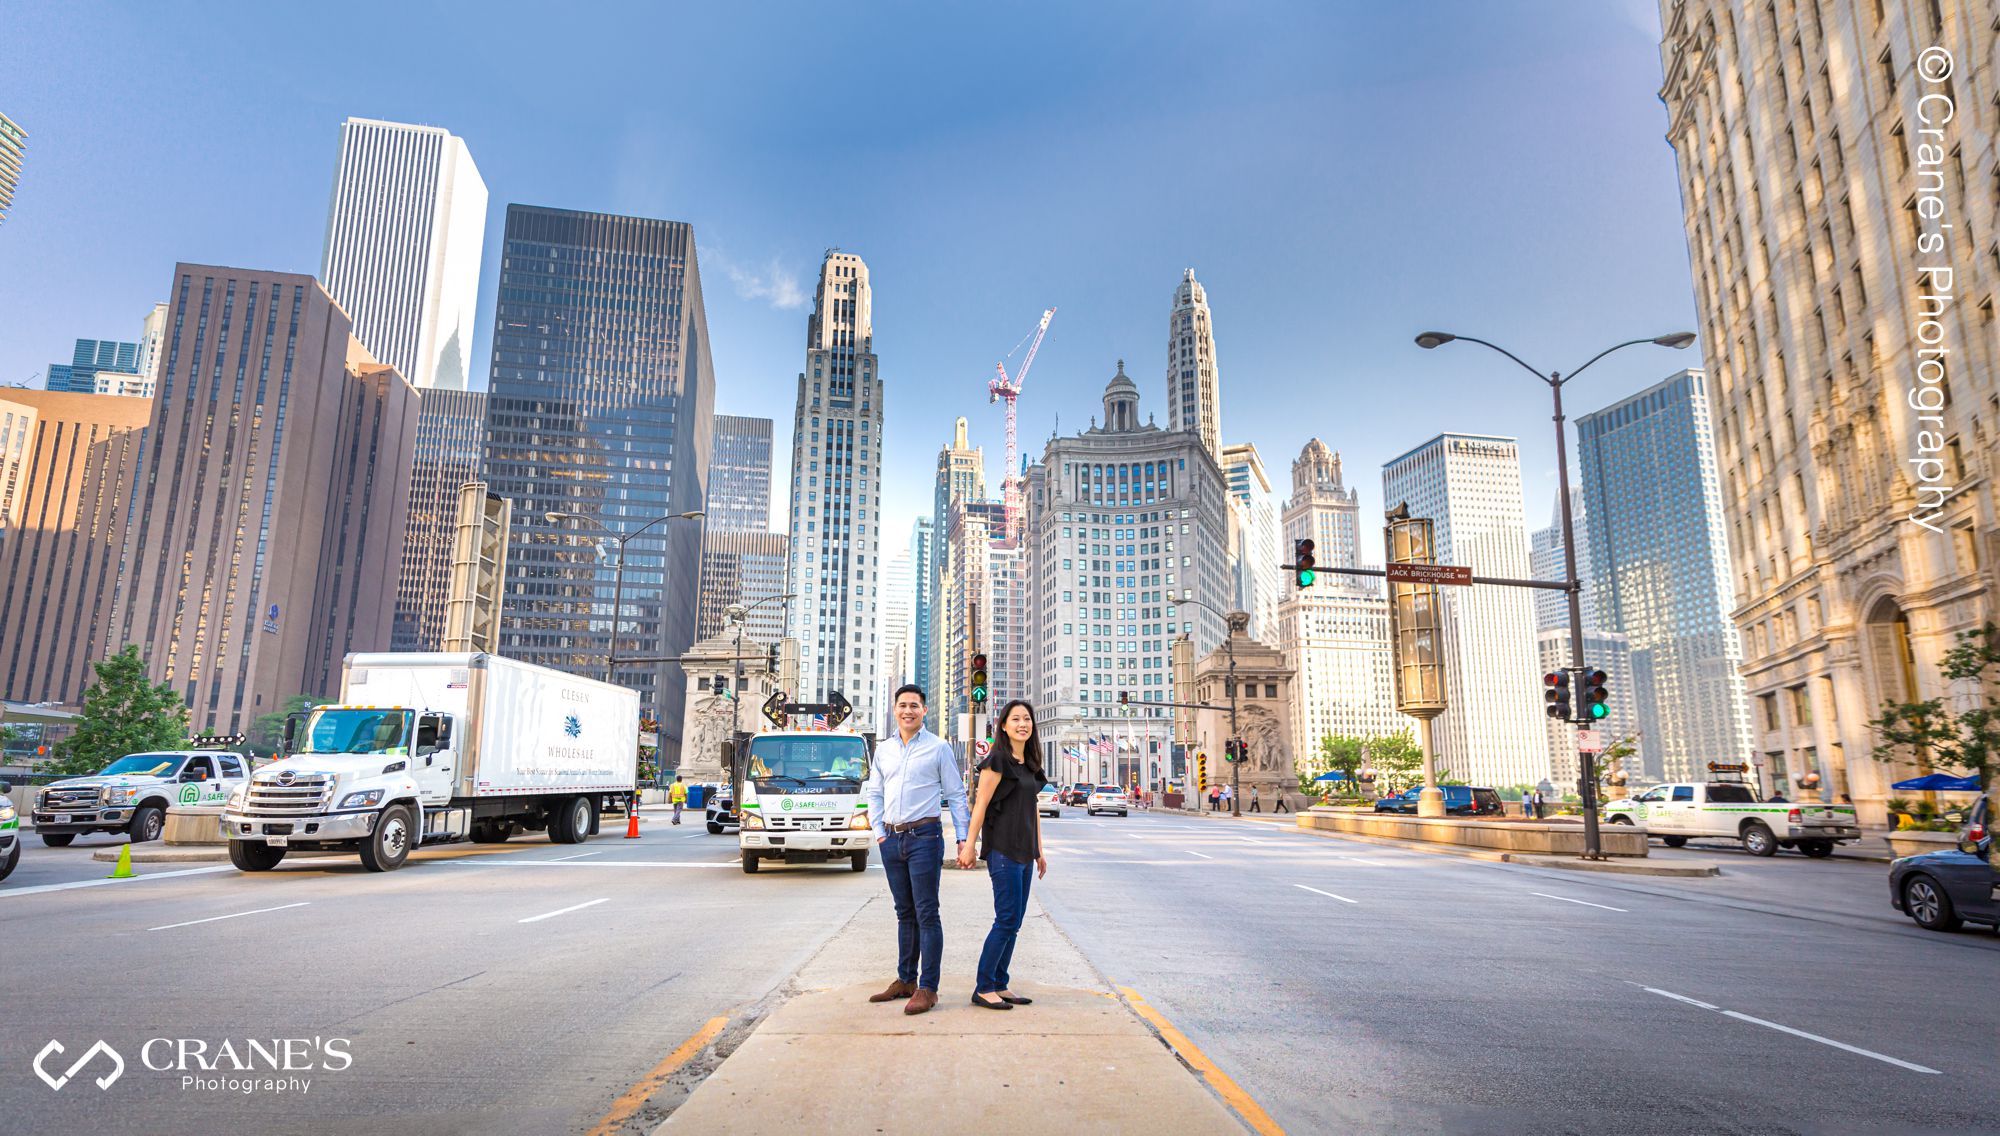 A panoramic engagement photo of the skyline of Chicago in front of Wrigley Building